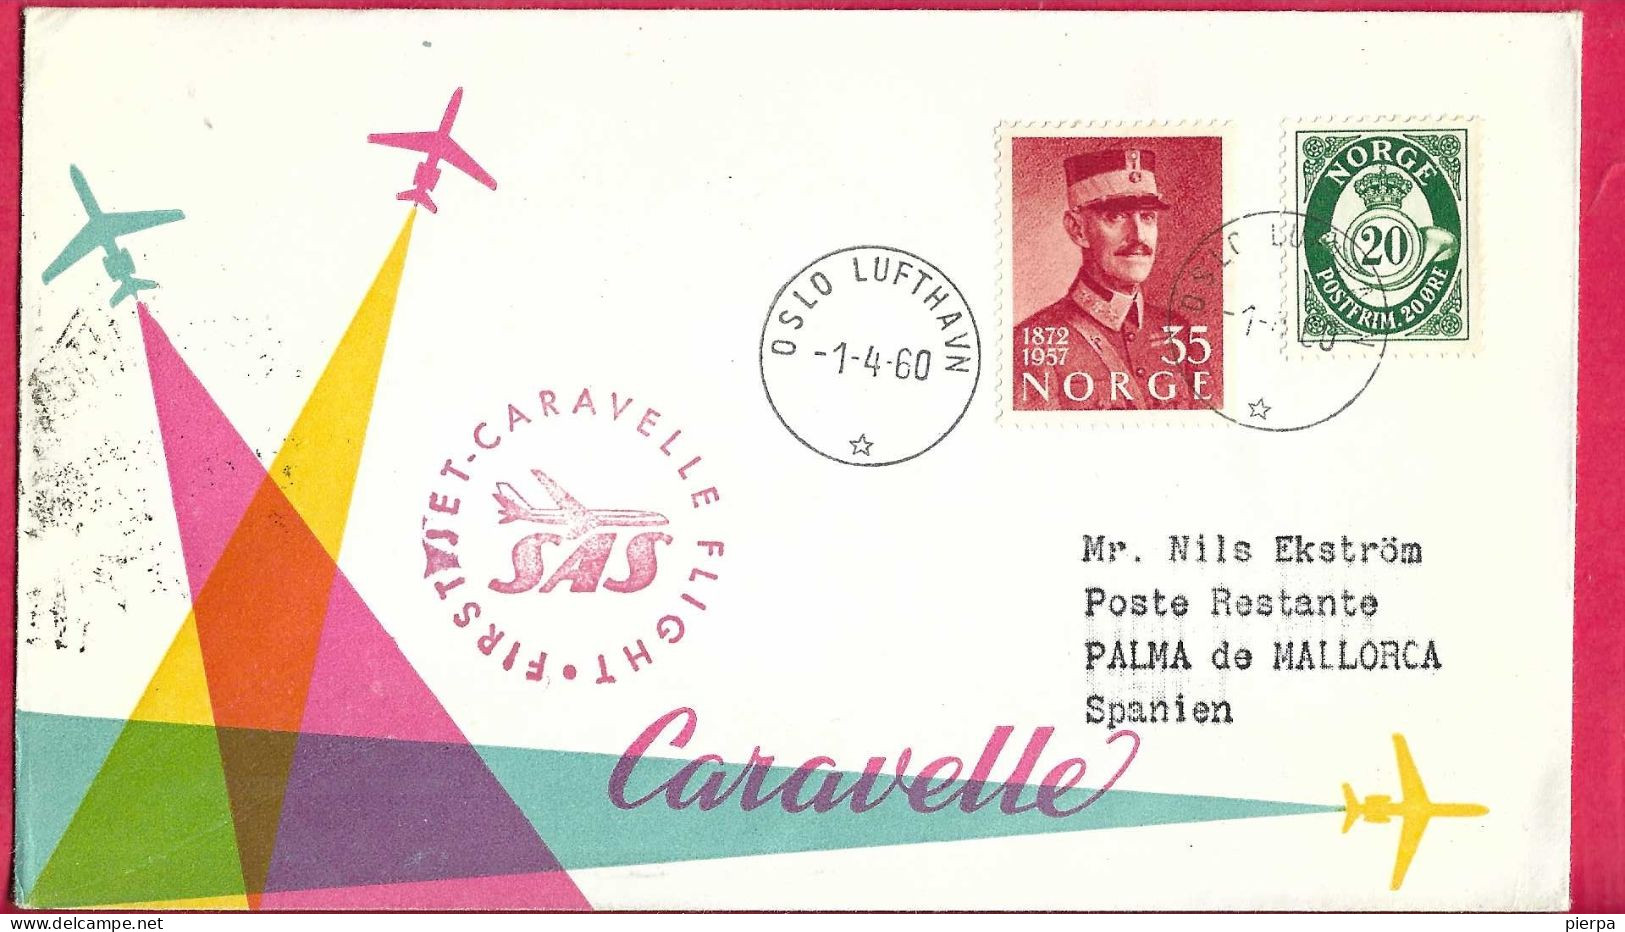 NORGE - FIRST CARAVELLE FLIGHT - SAS - FROM OSLO TO PALMA DE MALLORCA *1.4.60* ON OFFICIAL COVER - Lettres & Documents